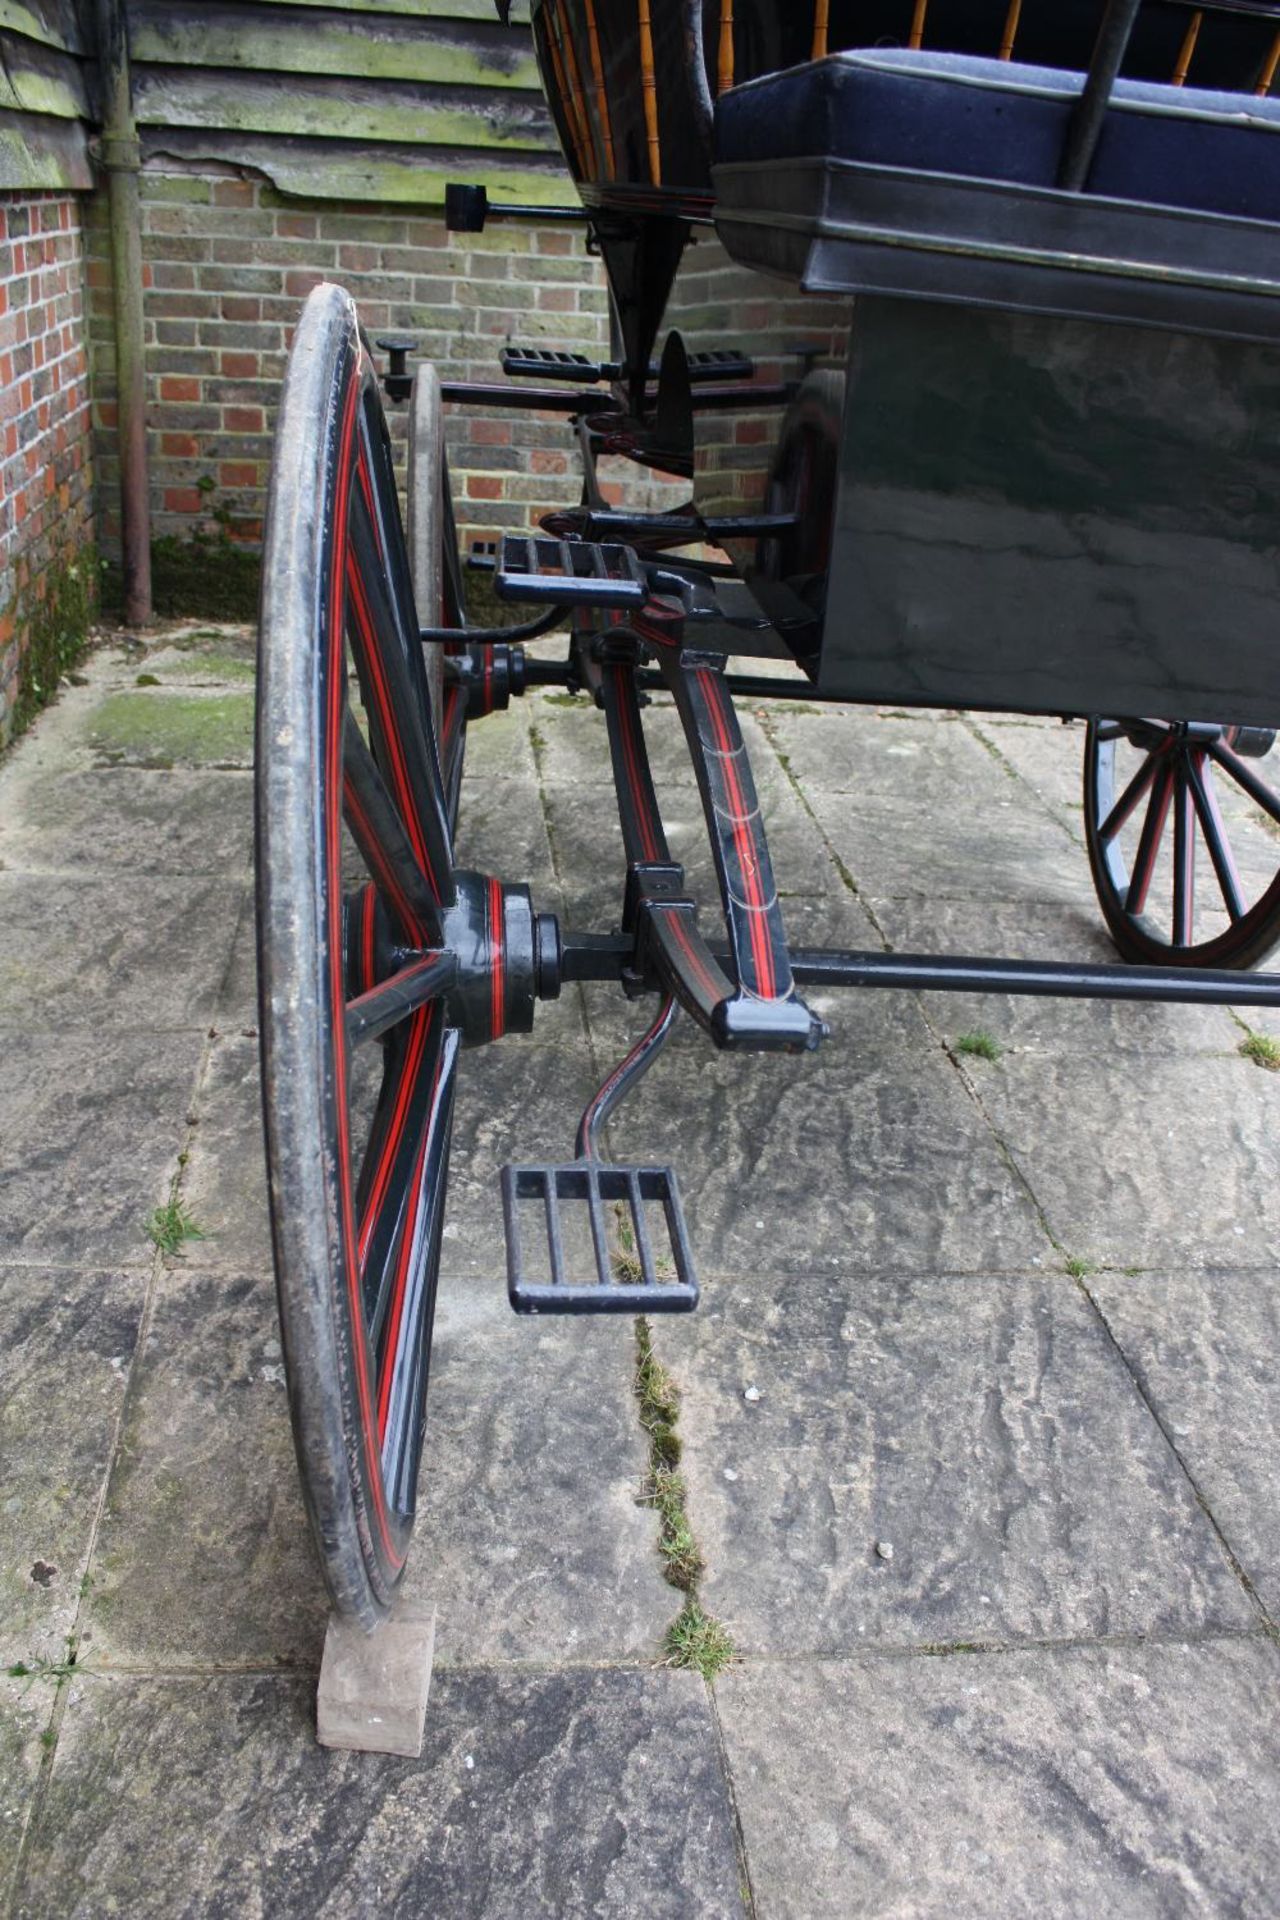 DEMI MAIL PHAETON by Thrupp and Maberley of London. An important and now rare formal carriage - Image 15 of 20